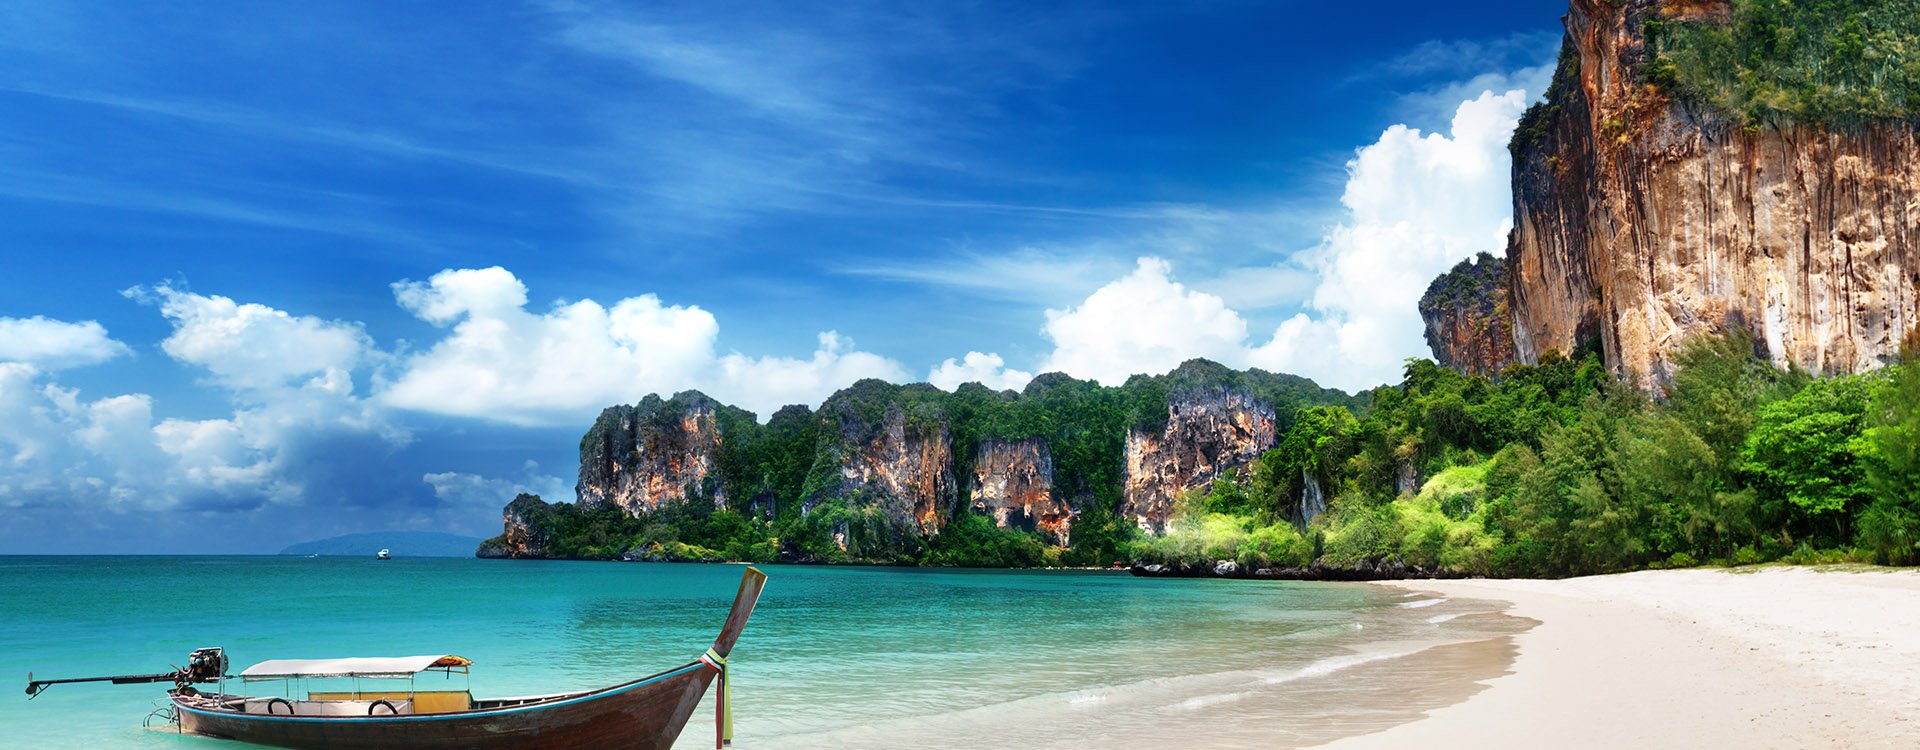 Railay beach, natural rock formations and clear blue waters and sampan boat in Krabi Thailand